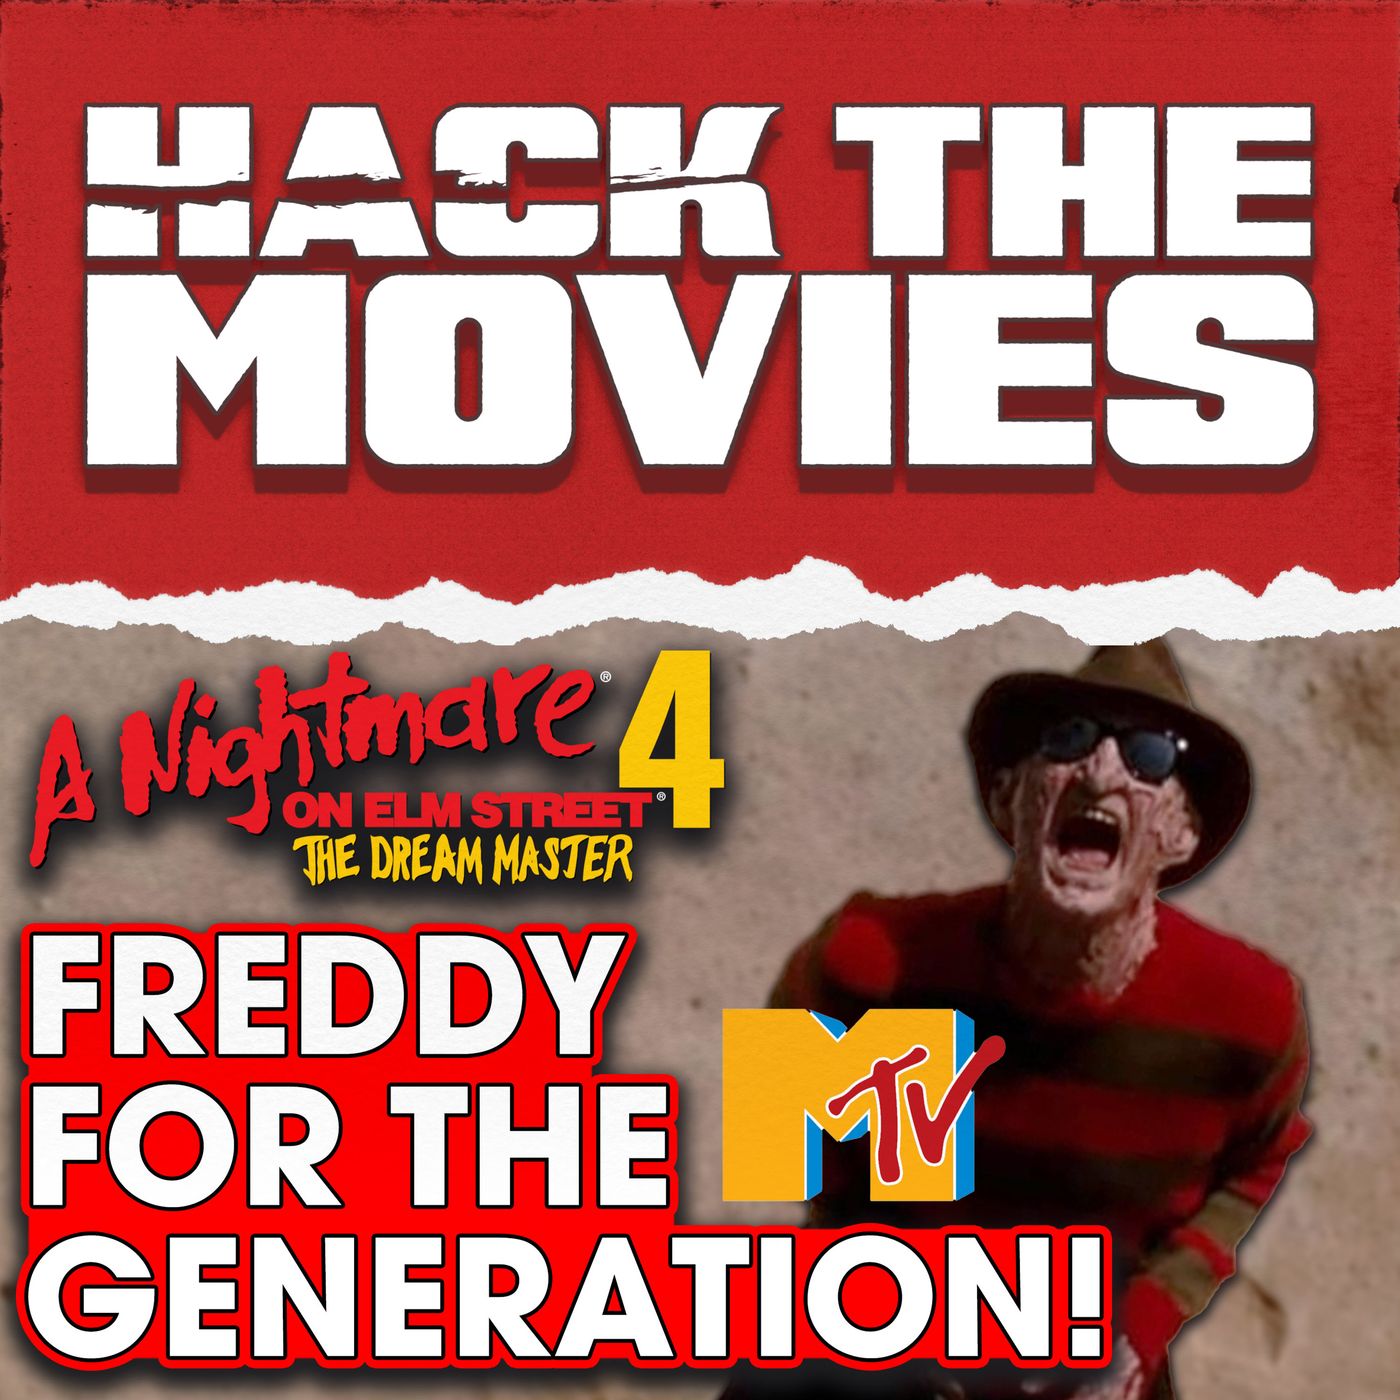 Freddy's Dead: The Final Nightmare - Movies on Google Play